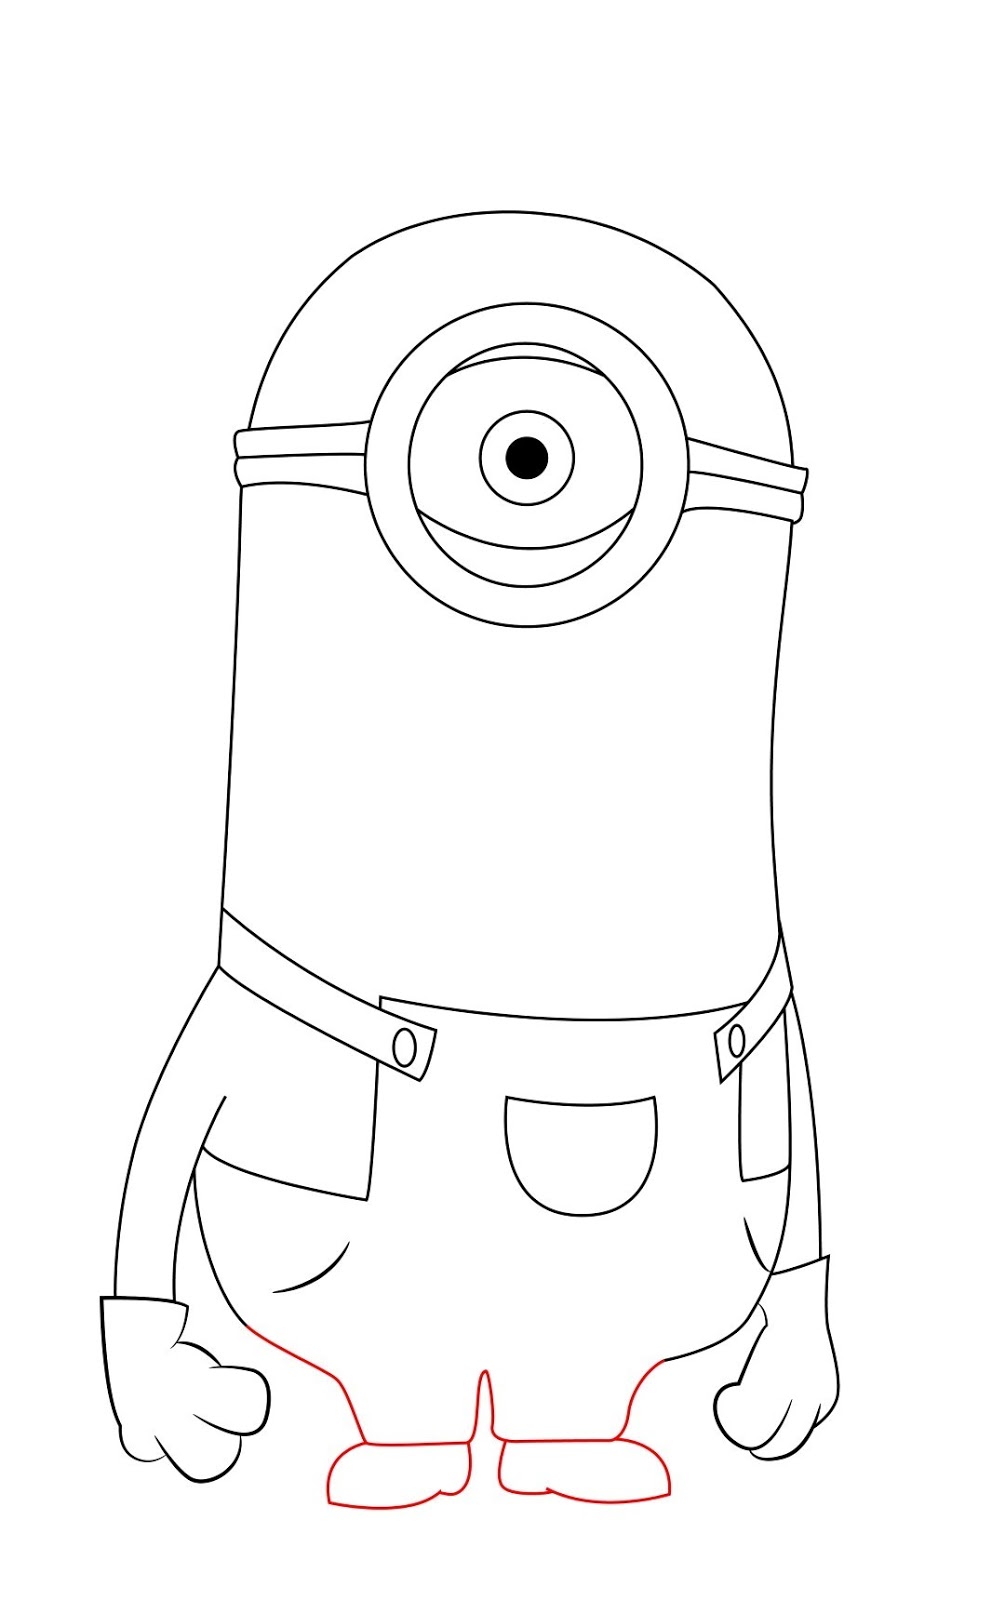 How To Draw Despicable Me Minions - Draw Central